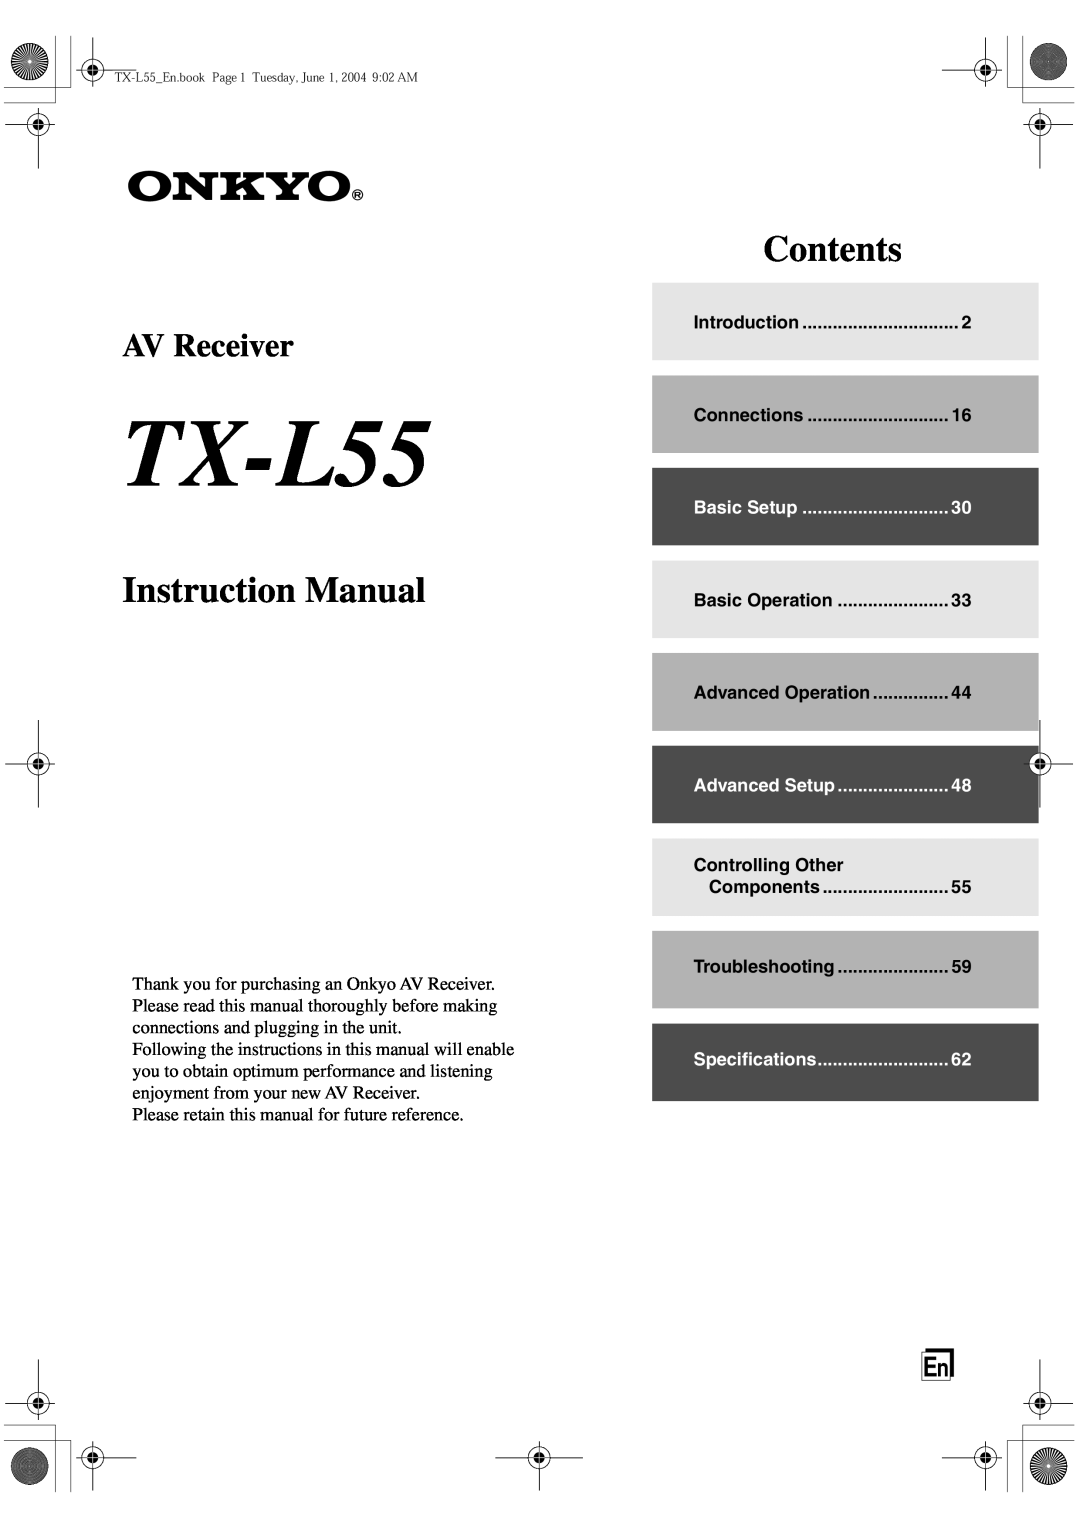 Onkyo TX-L55 instruction manual Contents, AV Receiver, Controlling Other 